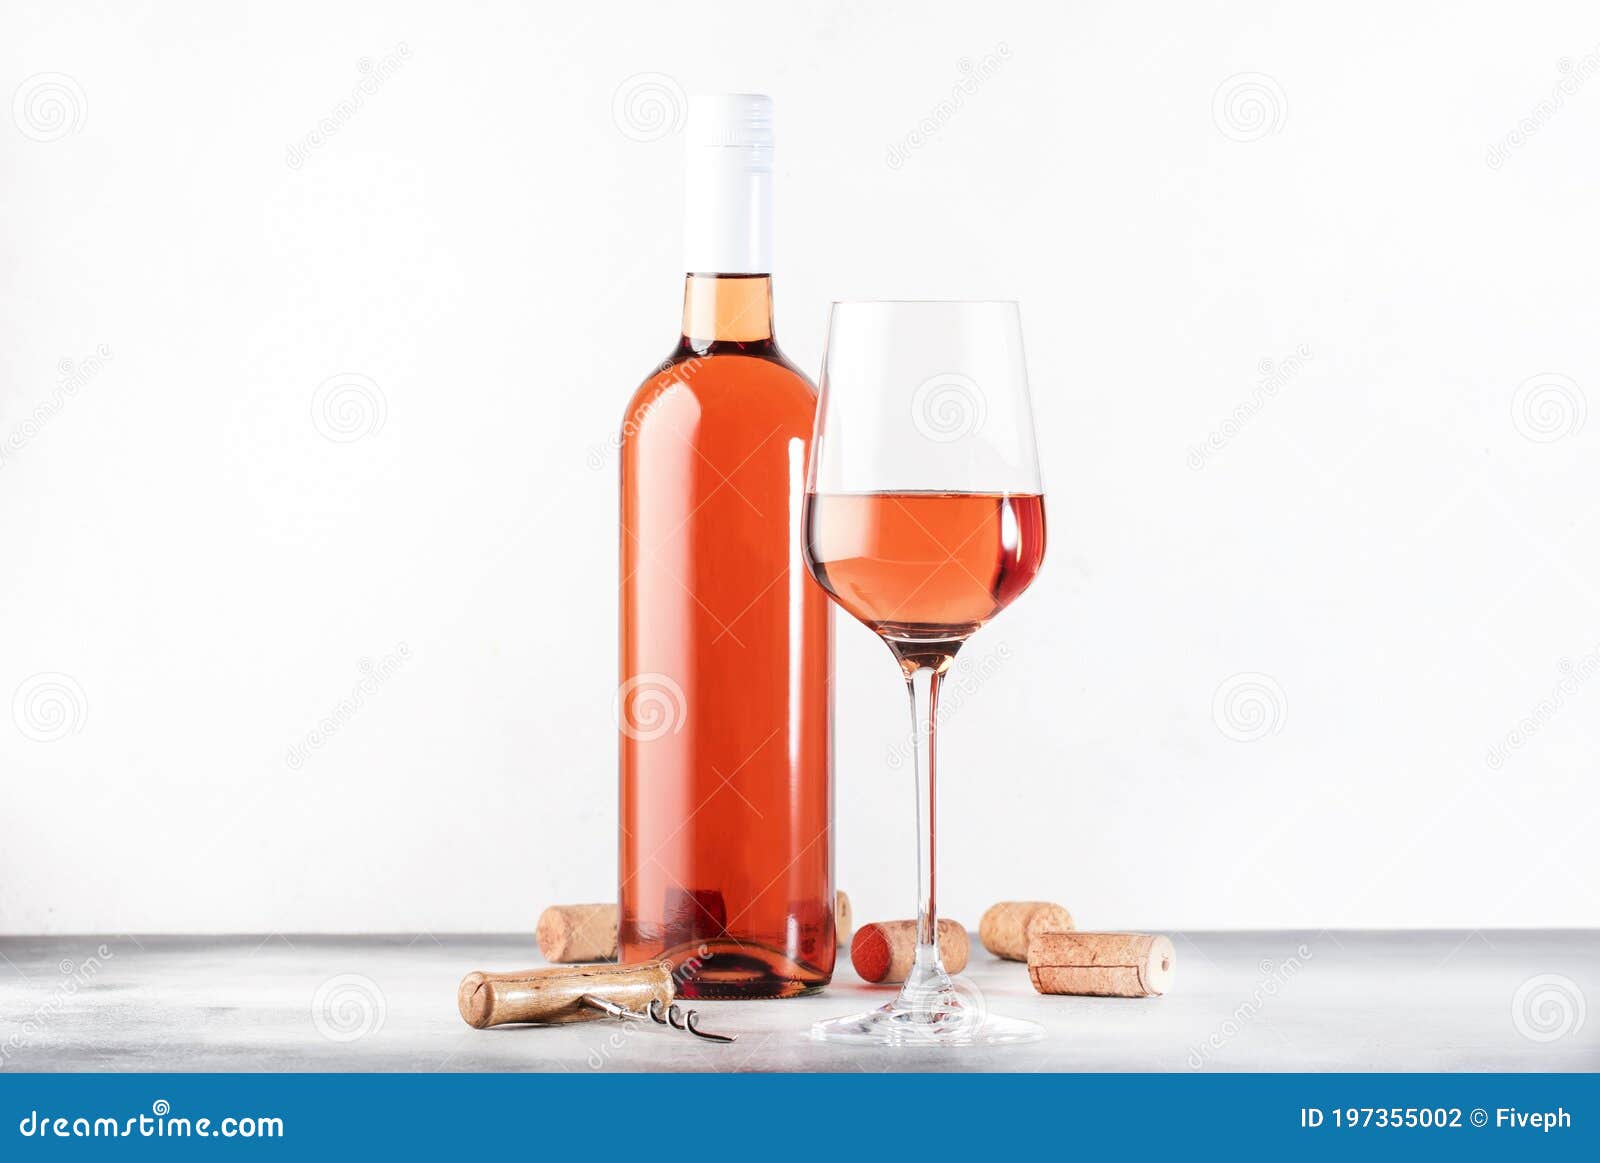 rose wine glass with bottle on the gray table. pink rosado, rosato or blush wine tasting in wineshop, bar concept. copy space